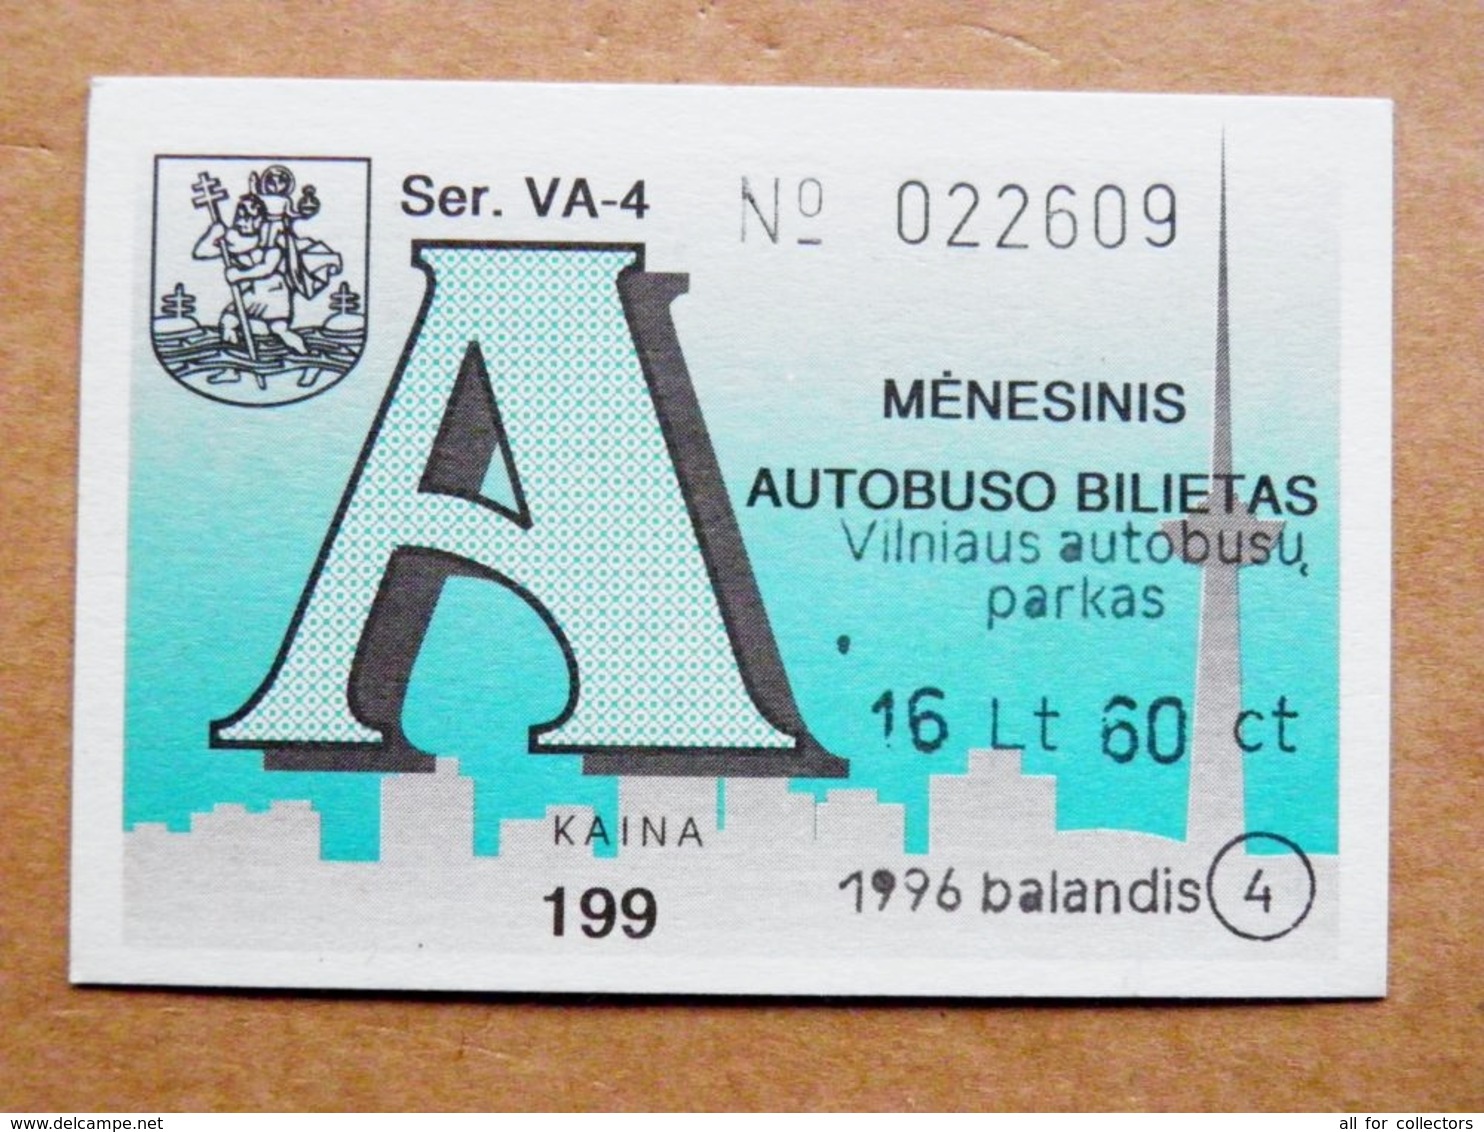 Transport Ticket Vilnius City Capital Of Lithuania BUS Monthly Ticket 1996 Year April 16,6lt - Europe